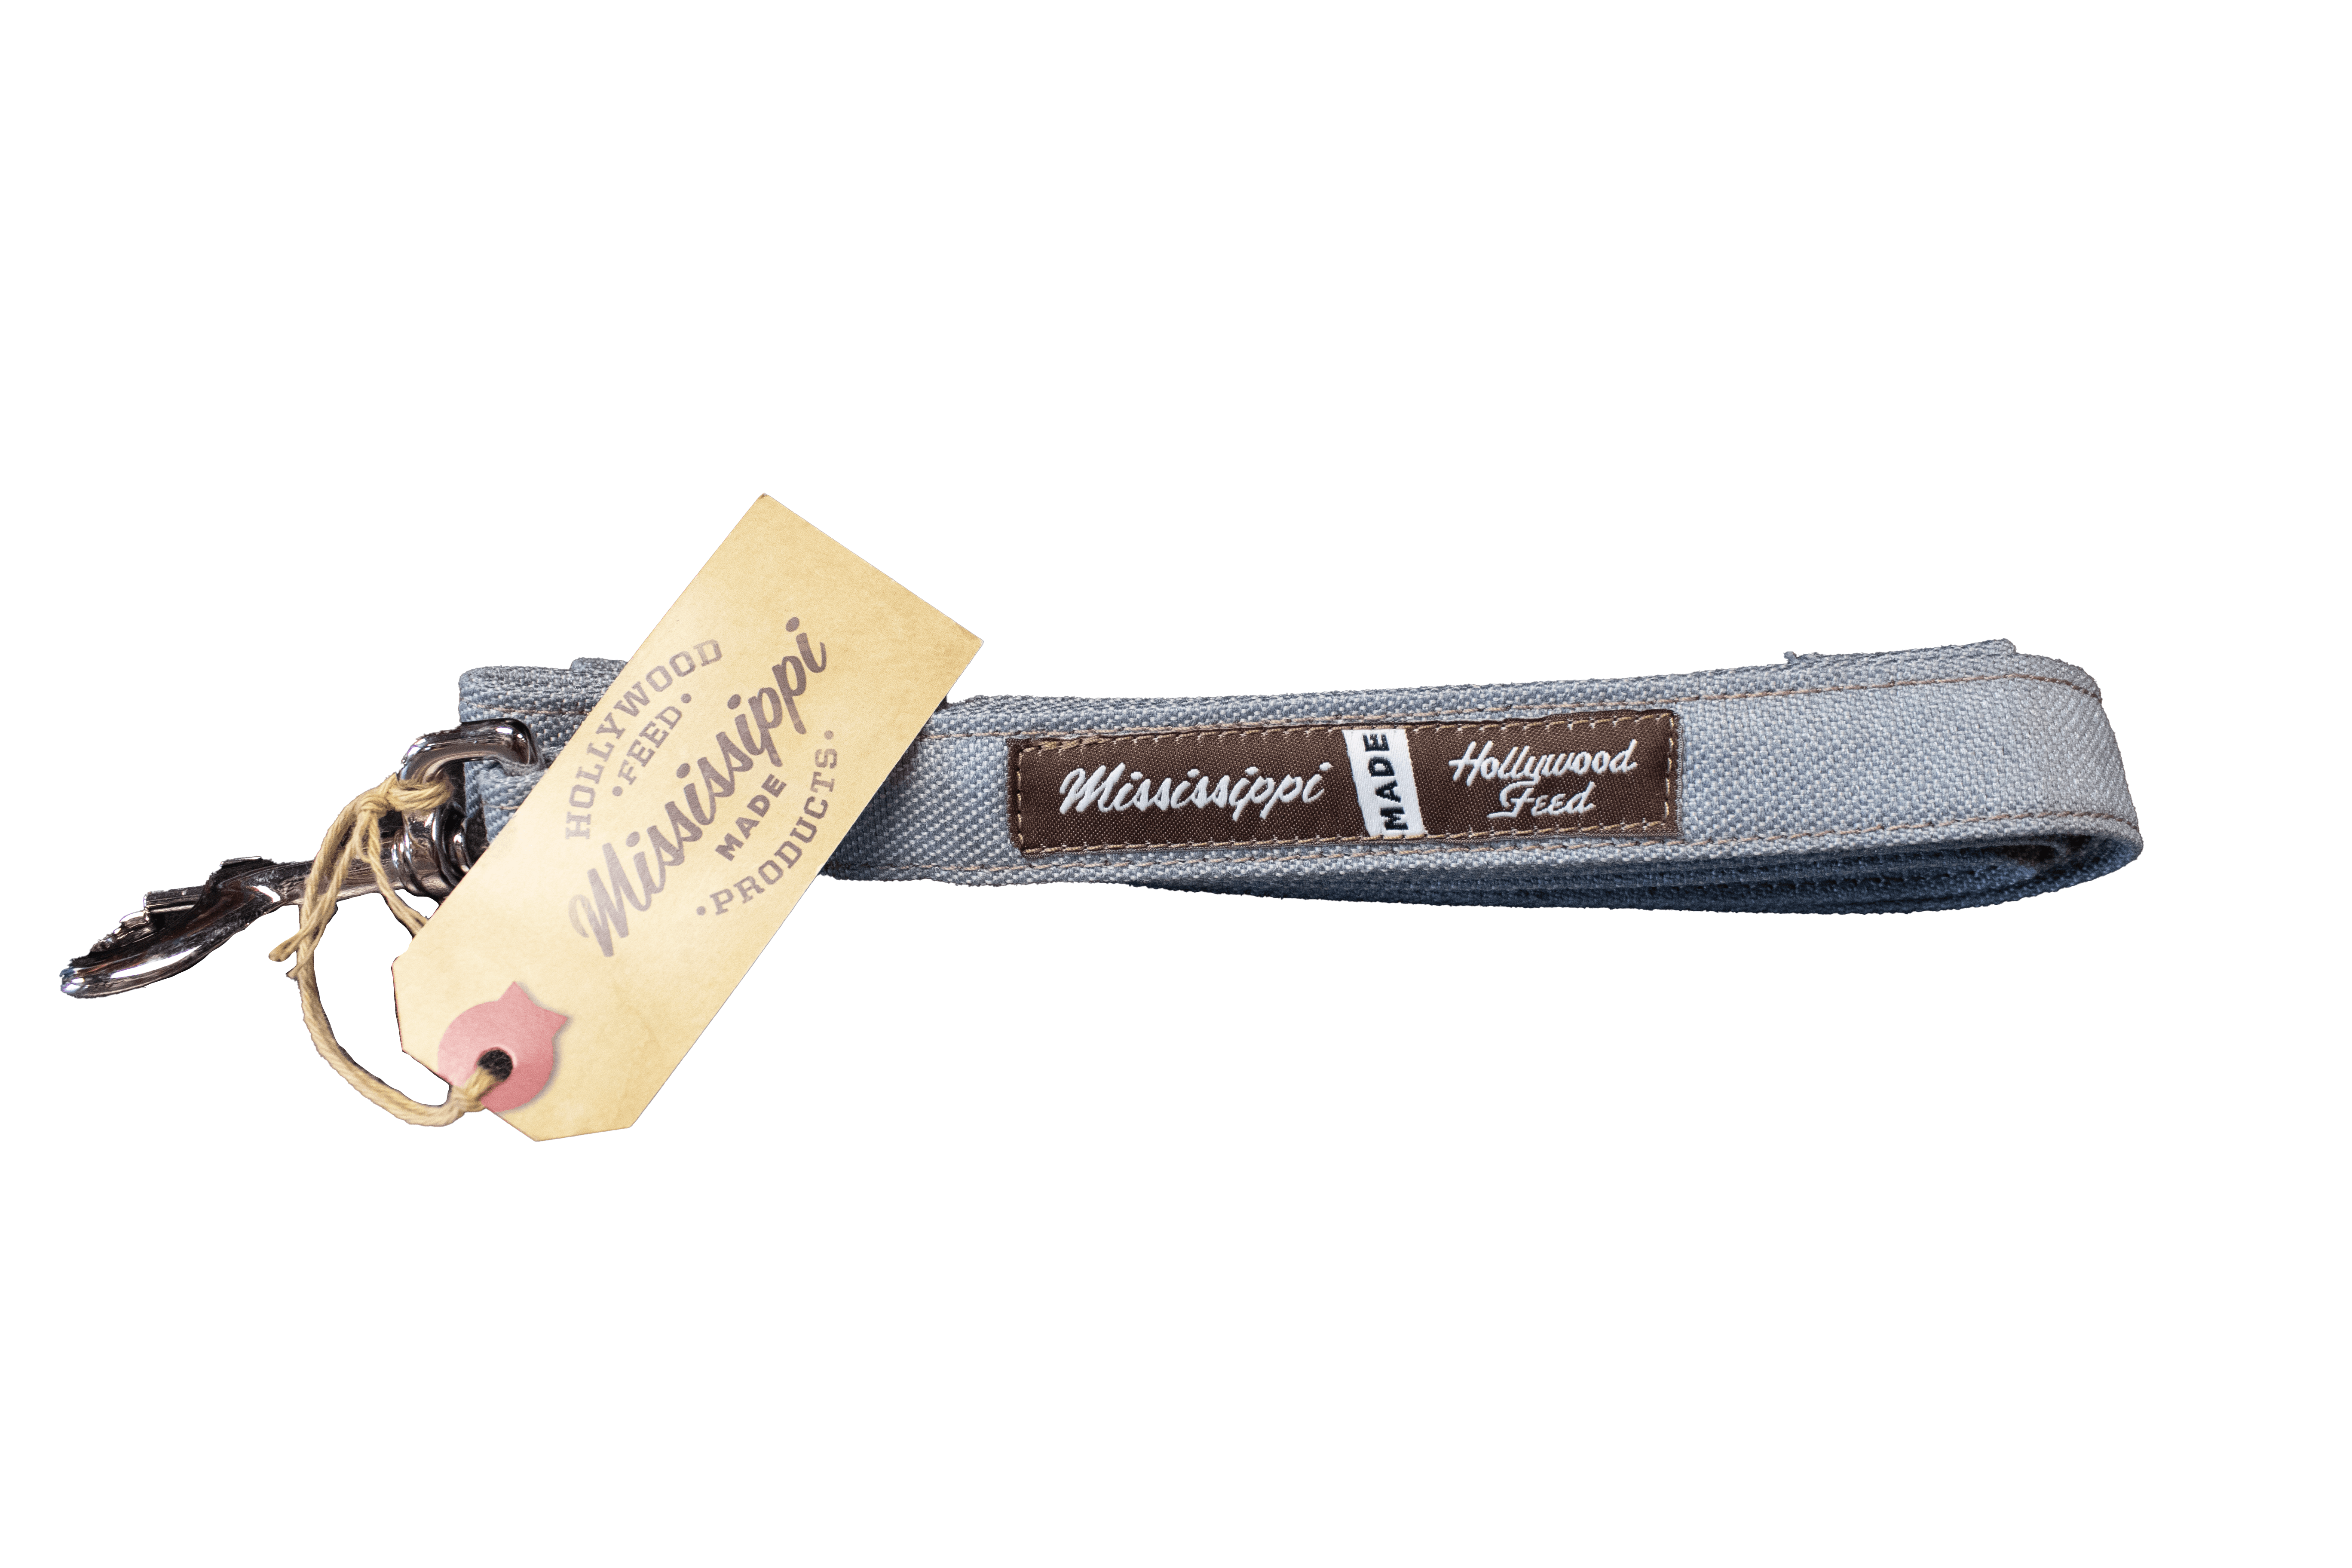 Hollywood feed mississippi made dog leash - assorted limited edition (denim color)